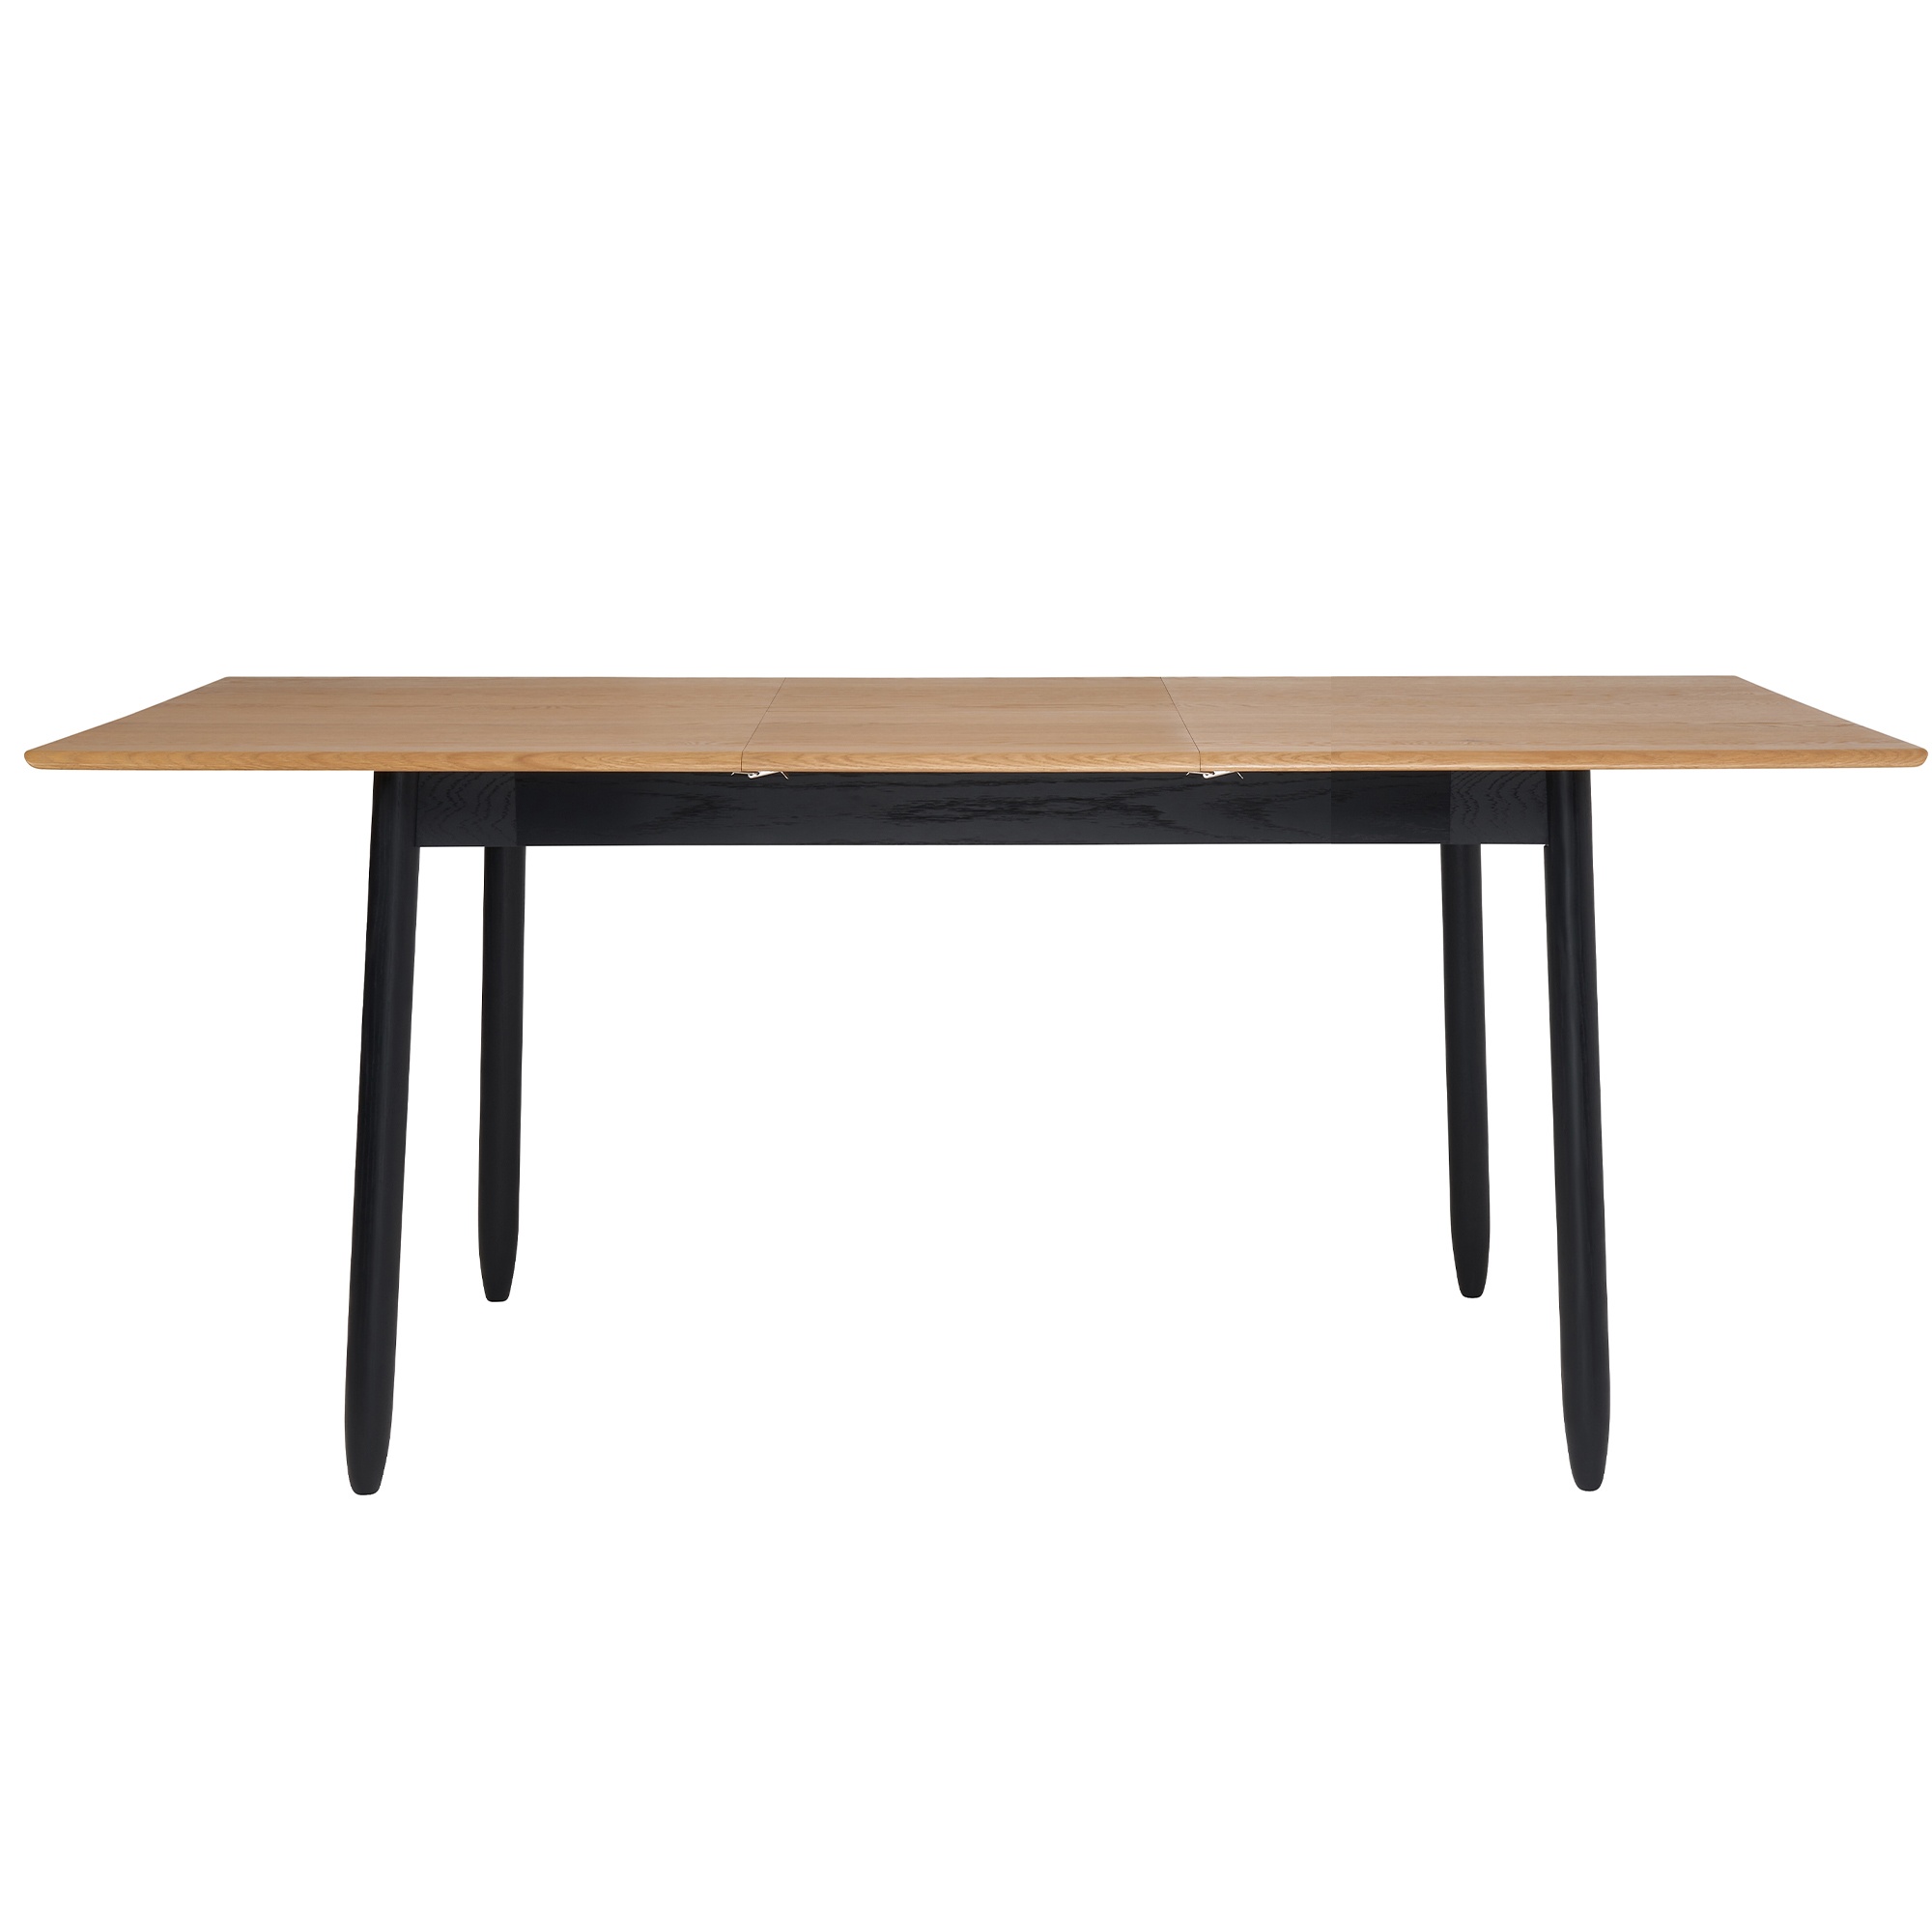 MONZA DINING Ercol Monza Small Extending Dining Table | Dining Tables ...